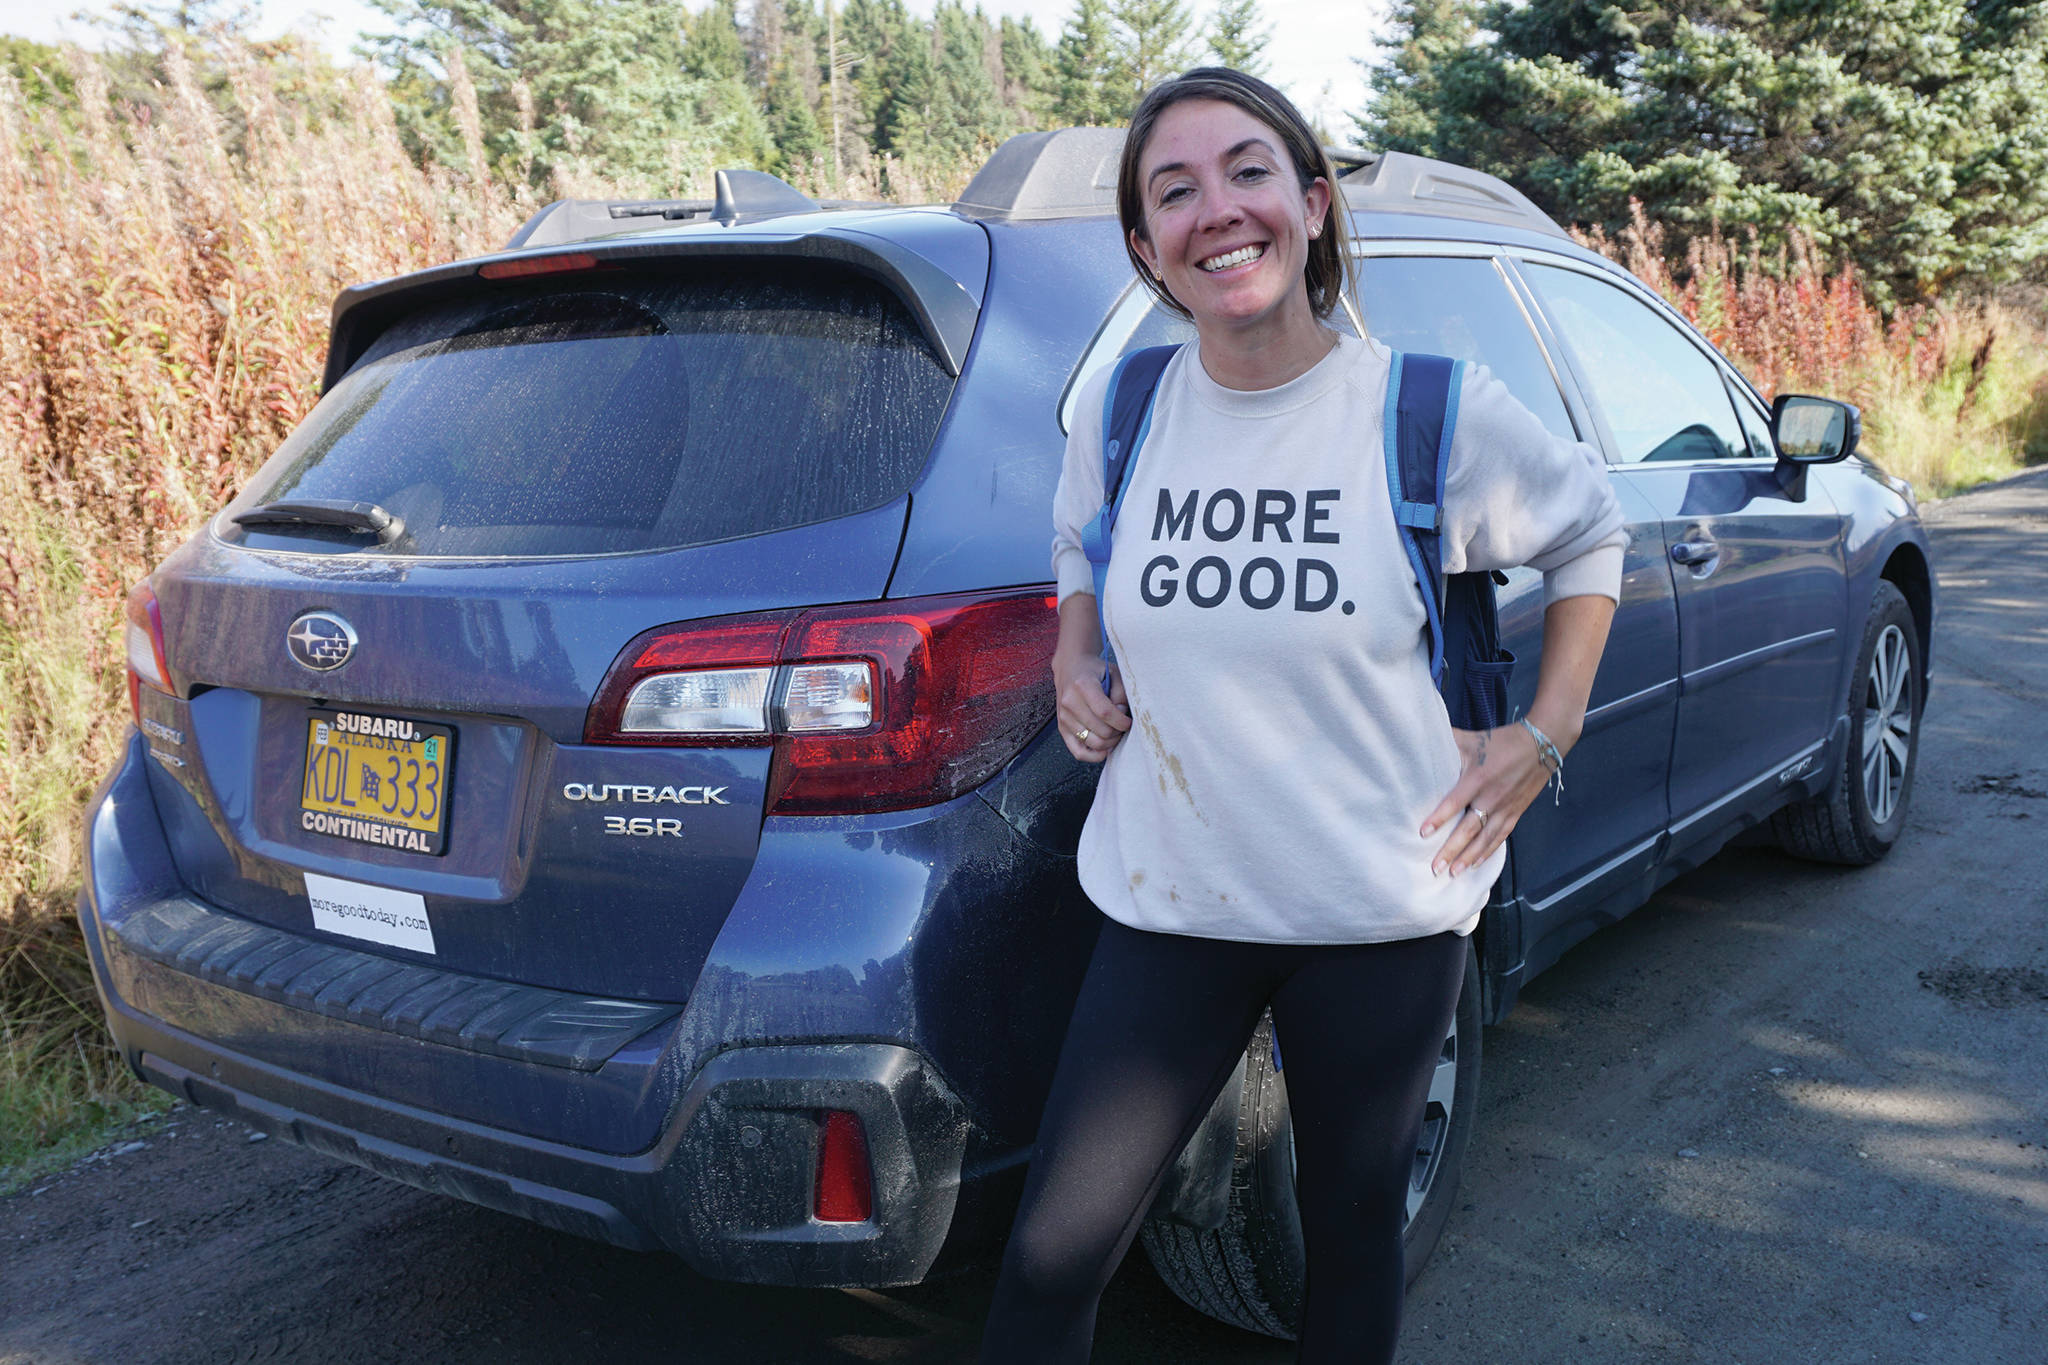 Mary Latham stands by her borrowed blue Subaru Outback on Sept. 16, 2019, in Homer, Alaska. Latham has been touring the United States collecting stories of human kindness to put in a book for people to read in hospital waiting rooms. Alaska is the 48th state Latham has visited since starting her trip in September 2016. (Photo by Michael Armstrong/Homer News)